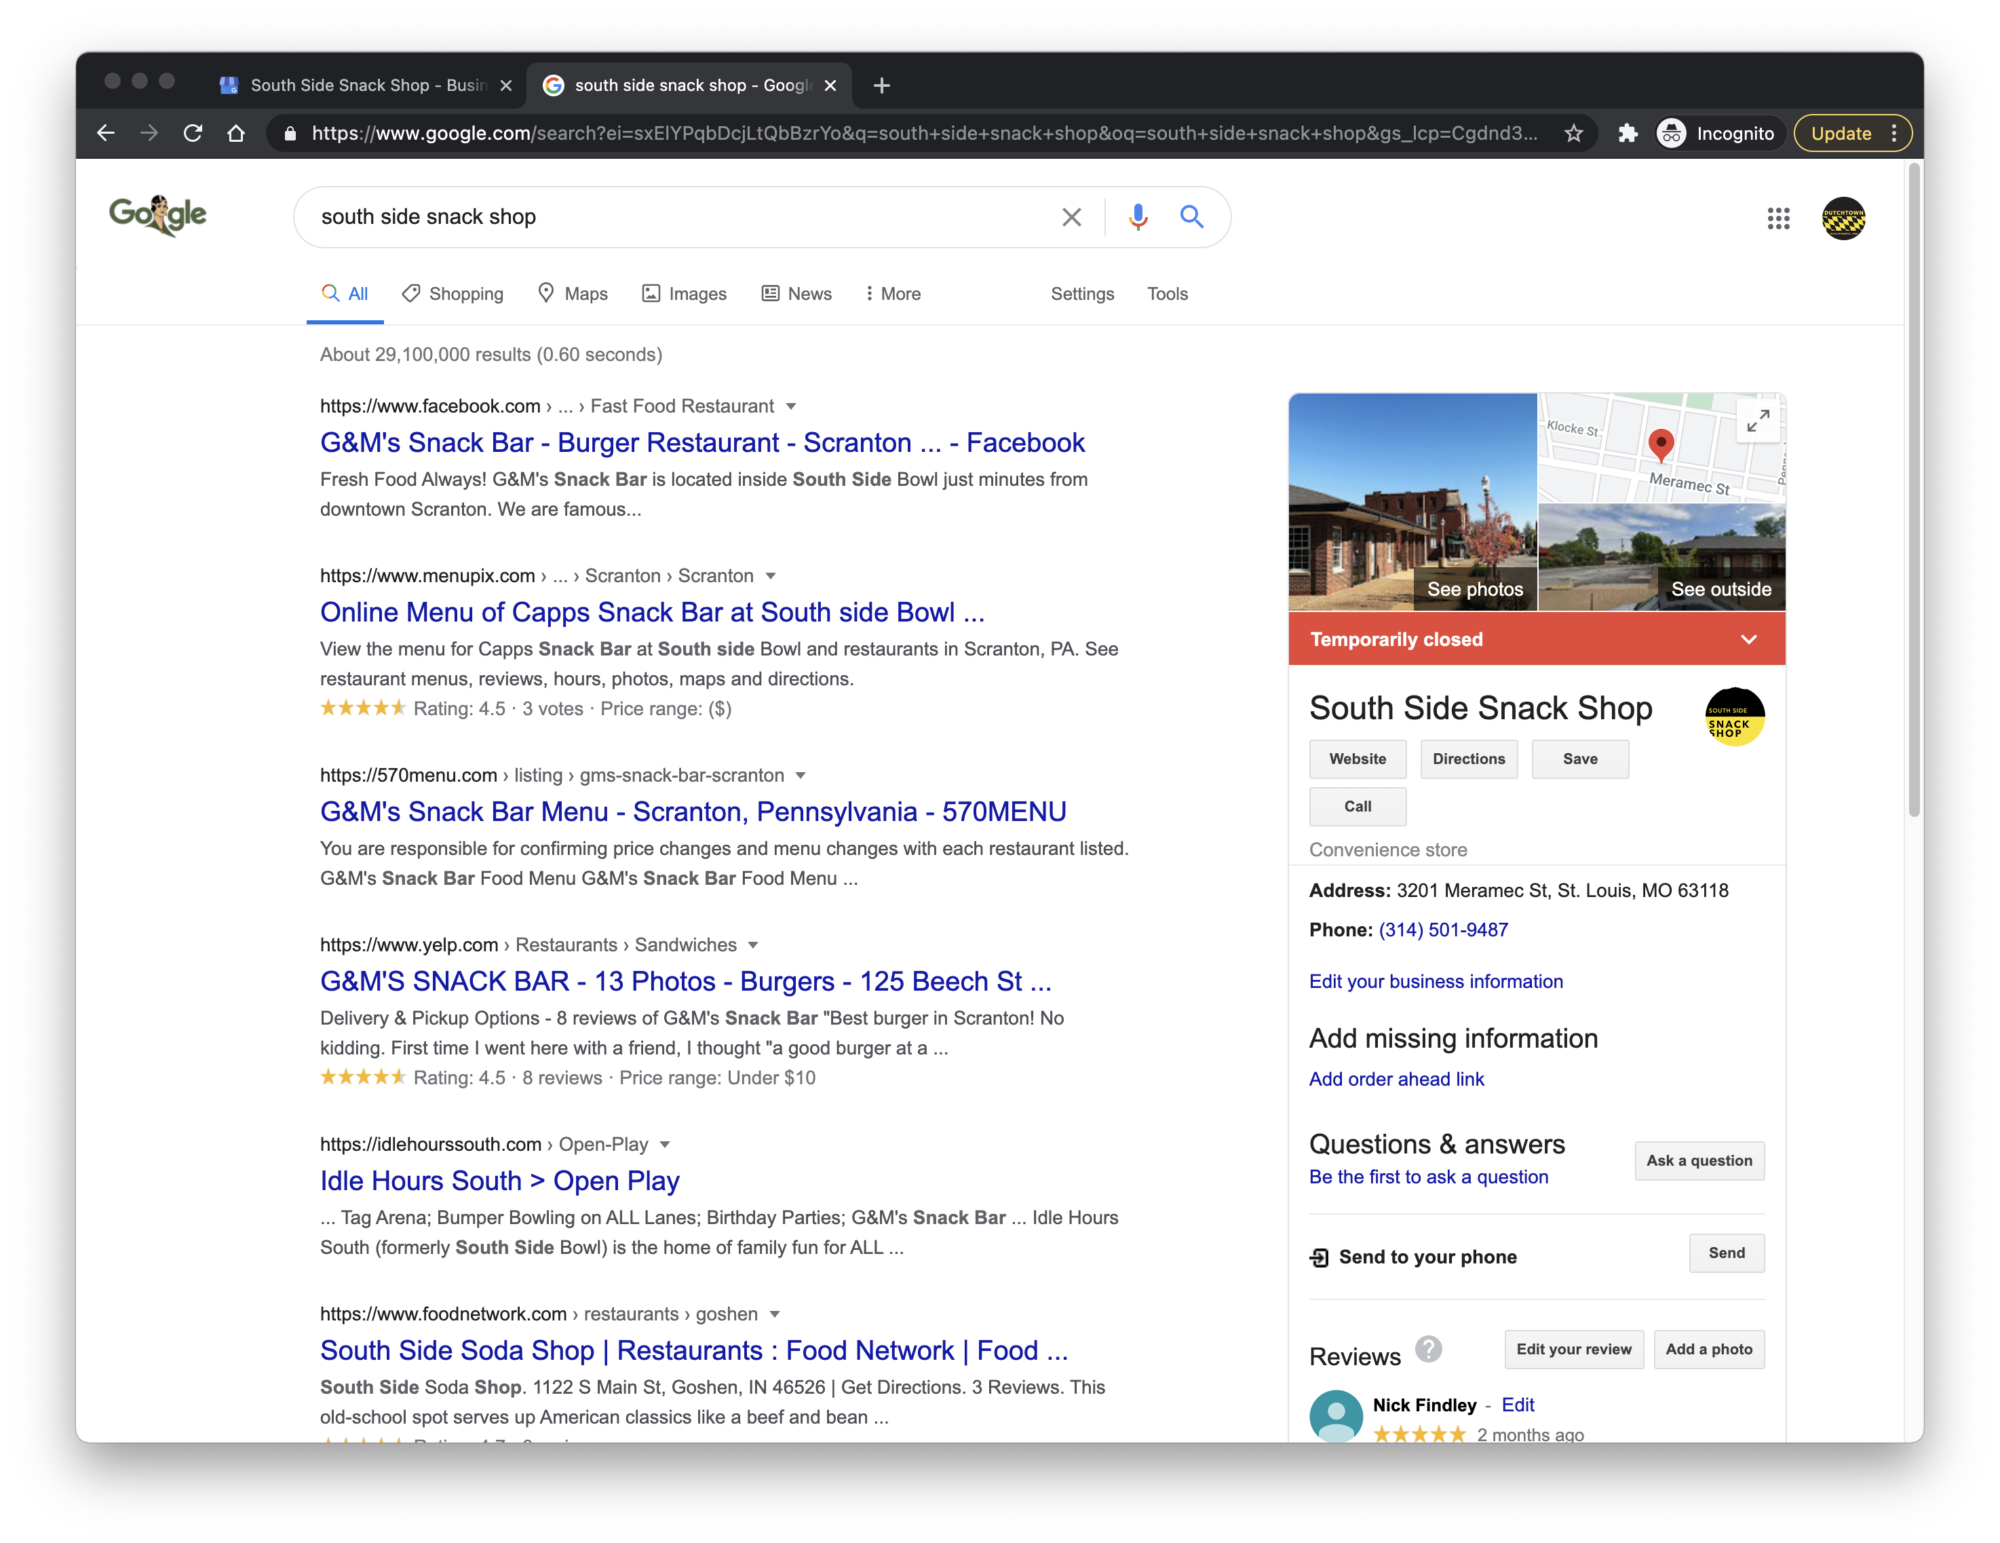 Search results page for our Google business profile.